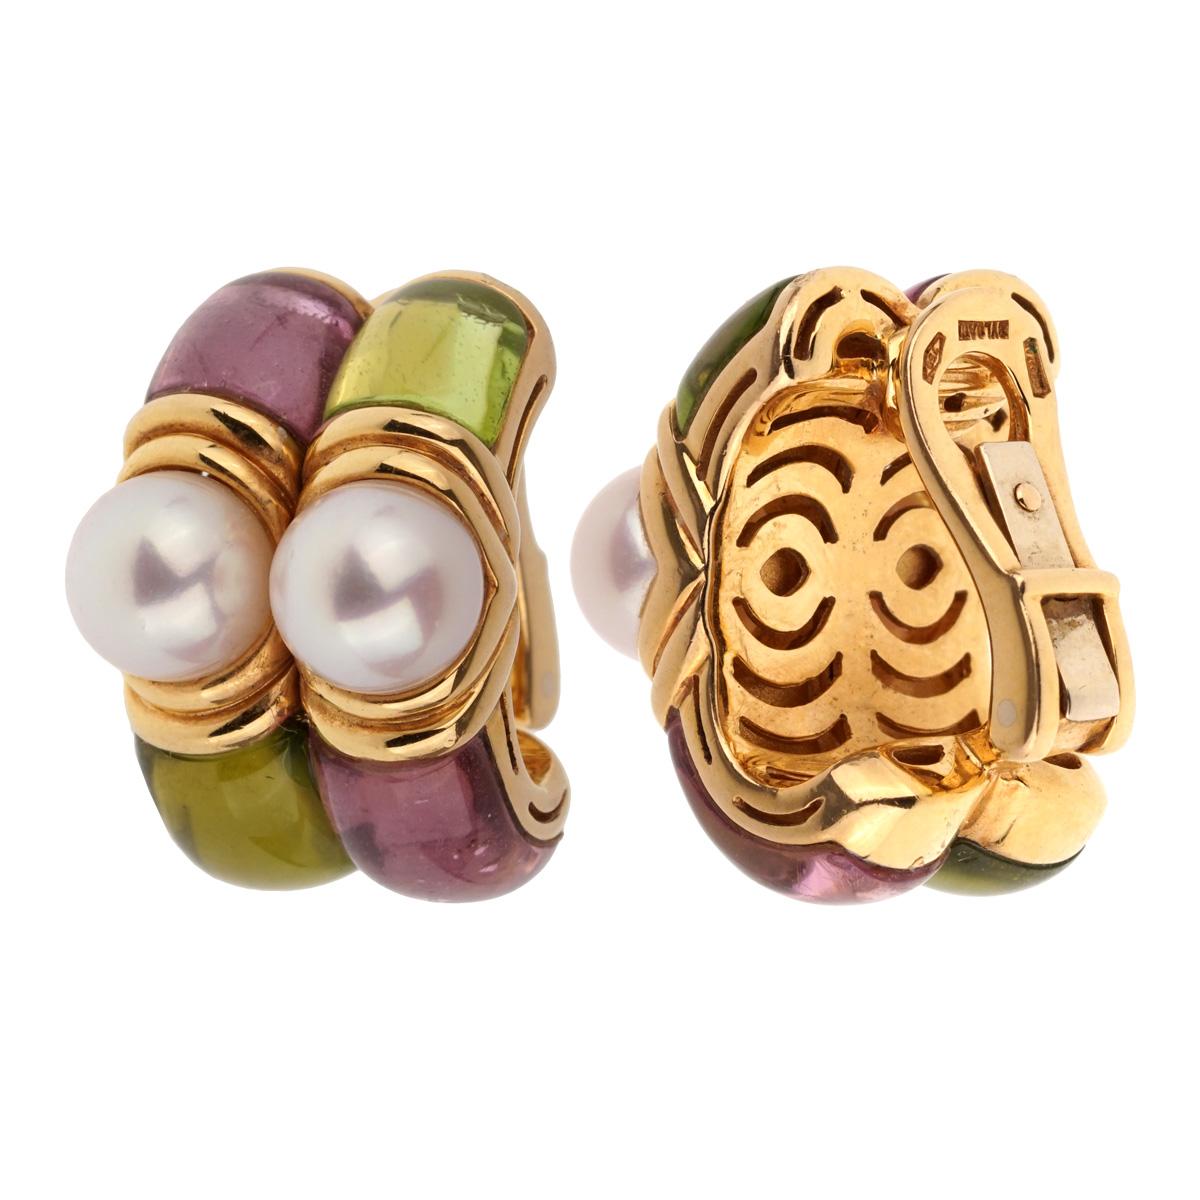 A chic pair of Bulgari earrings featuring carved Amethyst, Peridot, and Pearls in 18k yellow gold. The earrings measure 1/2